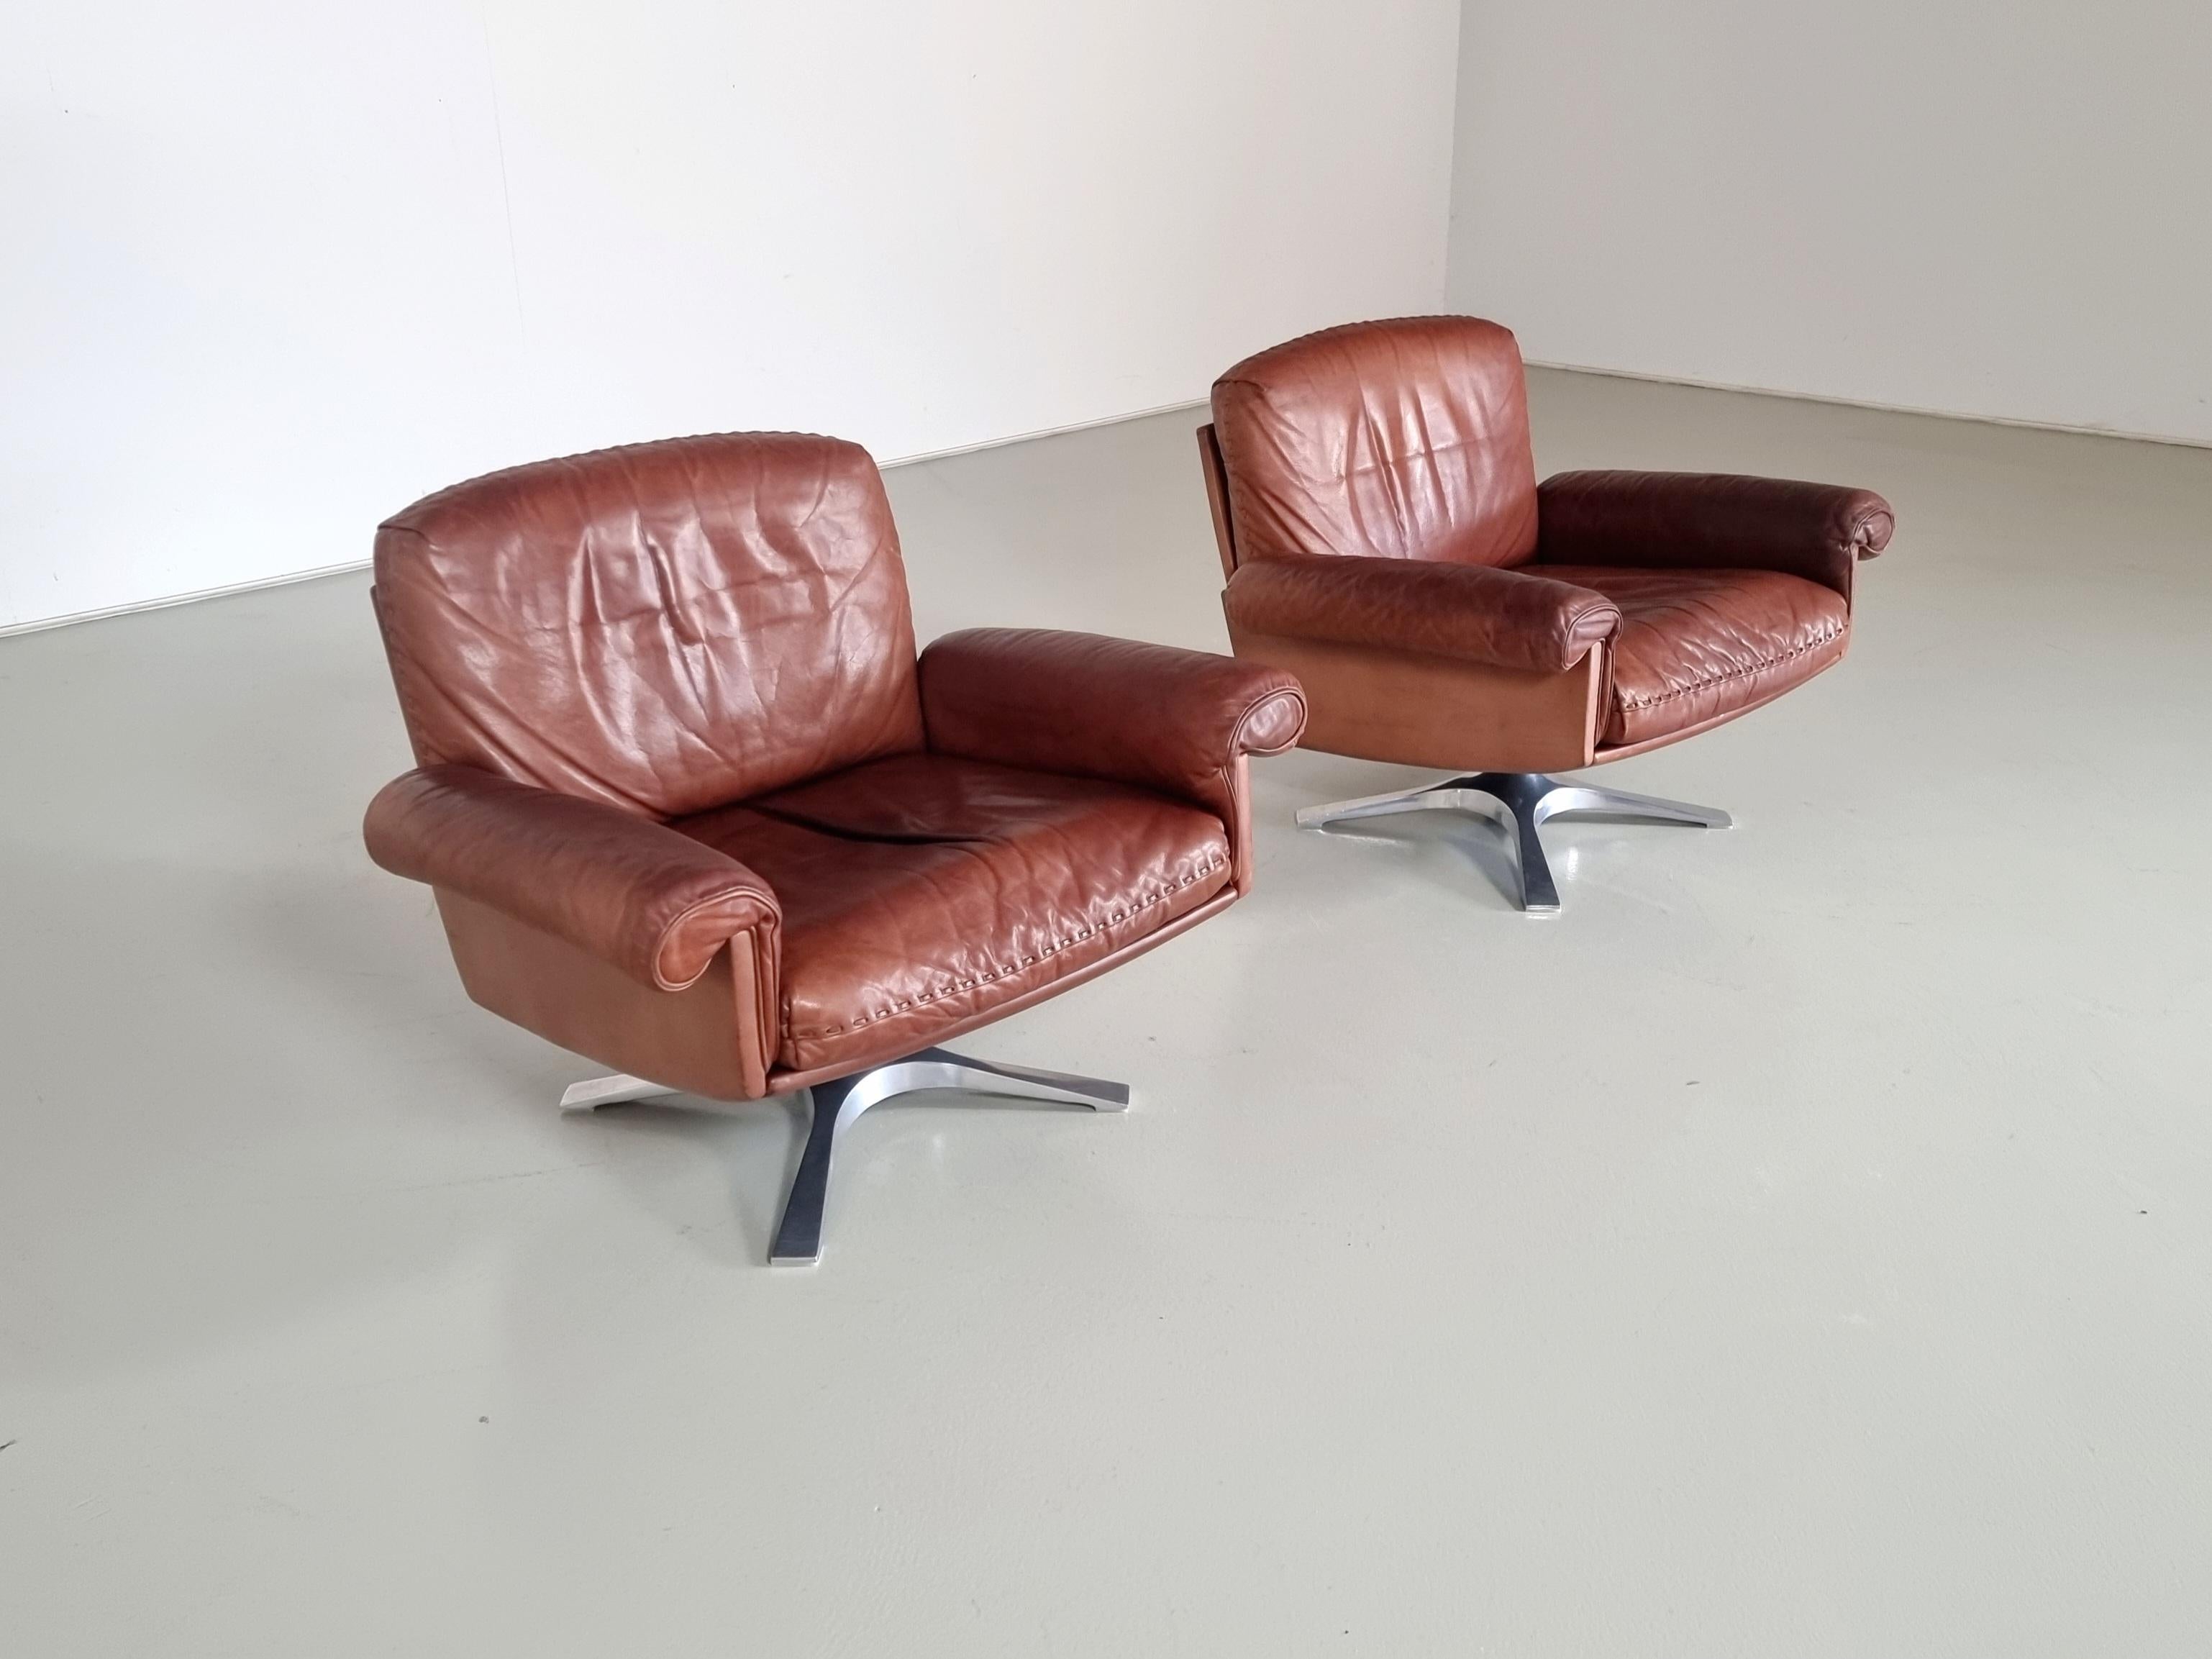 European Set of 2 De Sede Ds-31 Swivel Lounge Chairs in Light Brown Leather, 1970s For Sale